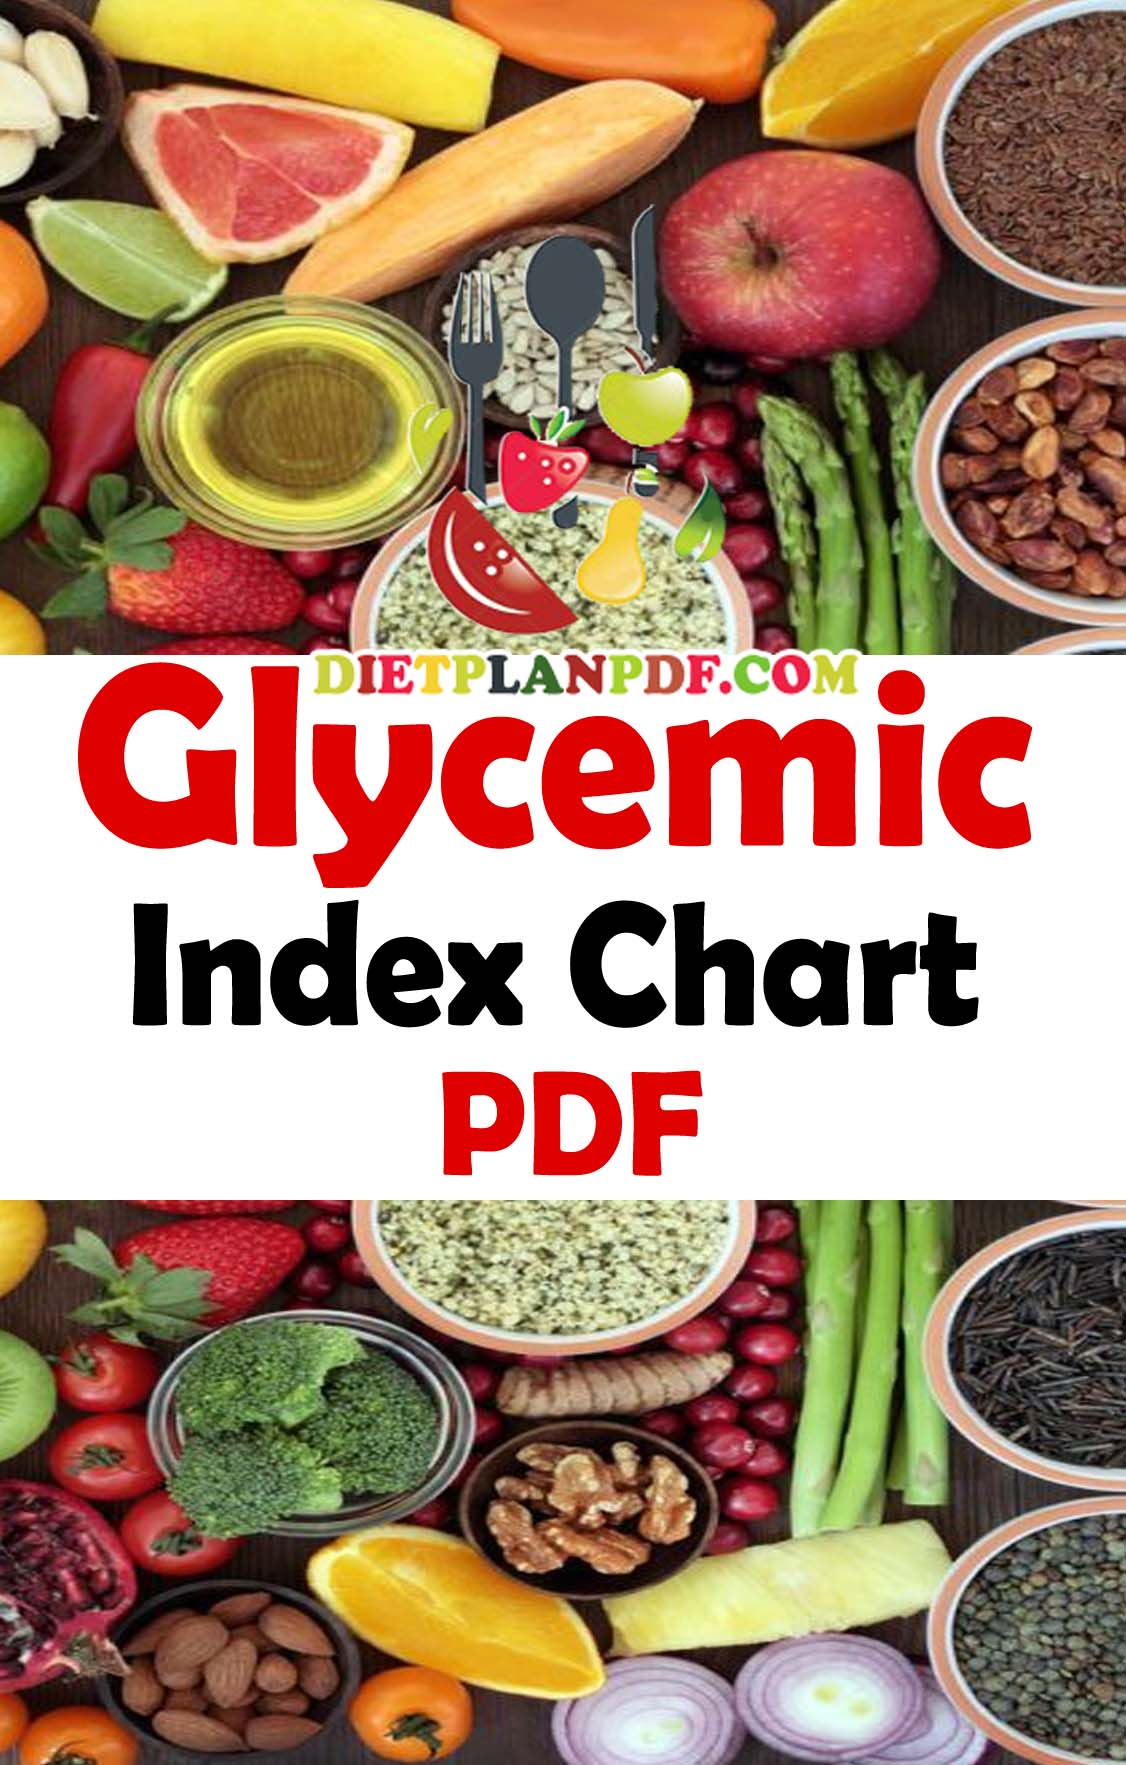 Glycemic Index Chart PDF What It Is amp How To Use It Diet Plan PDF